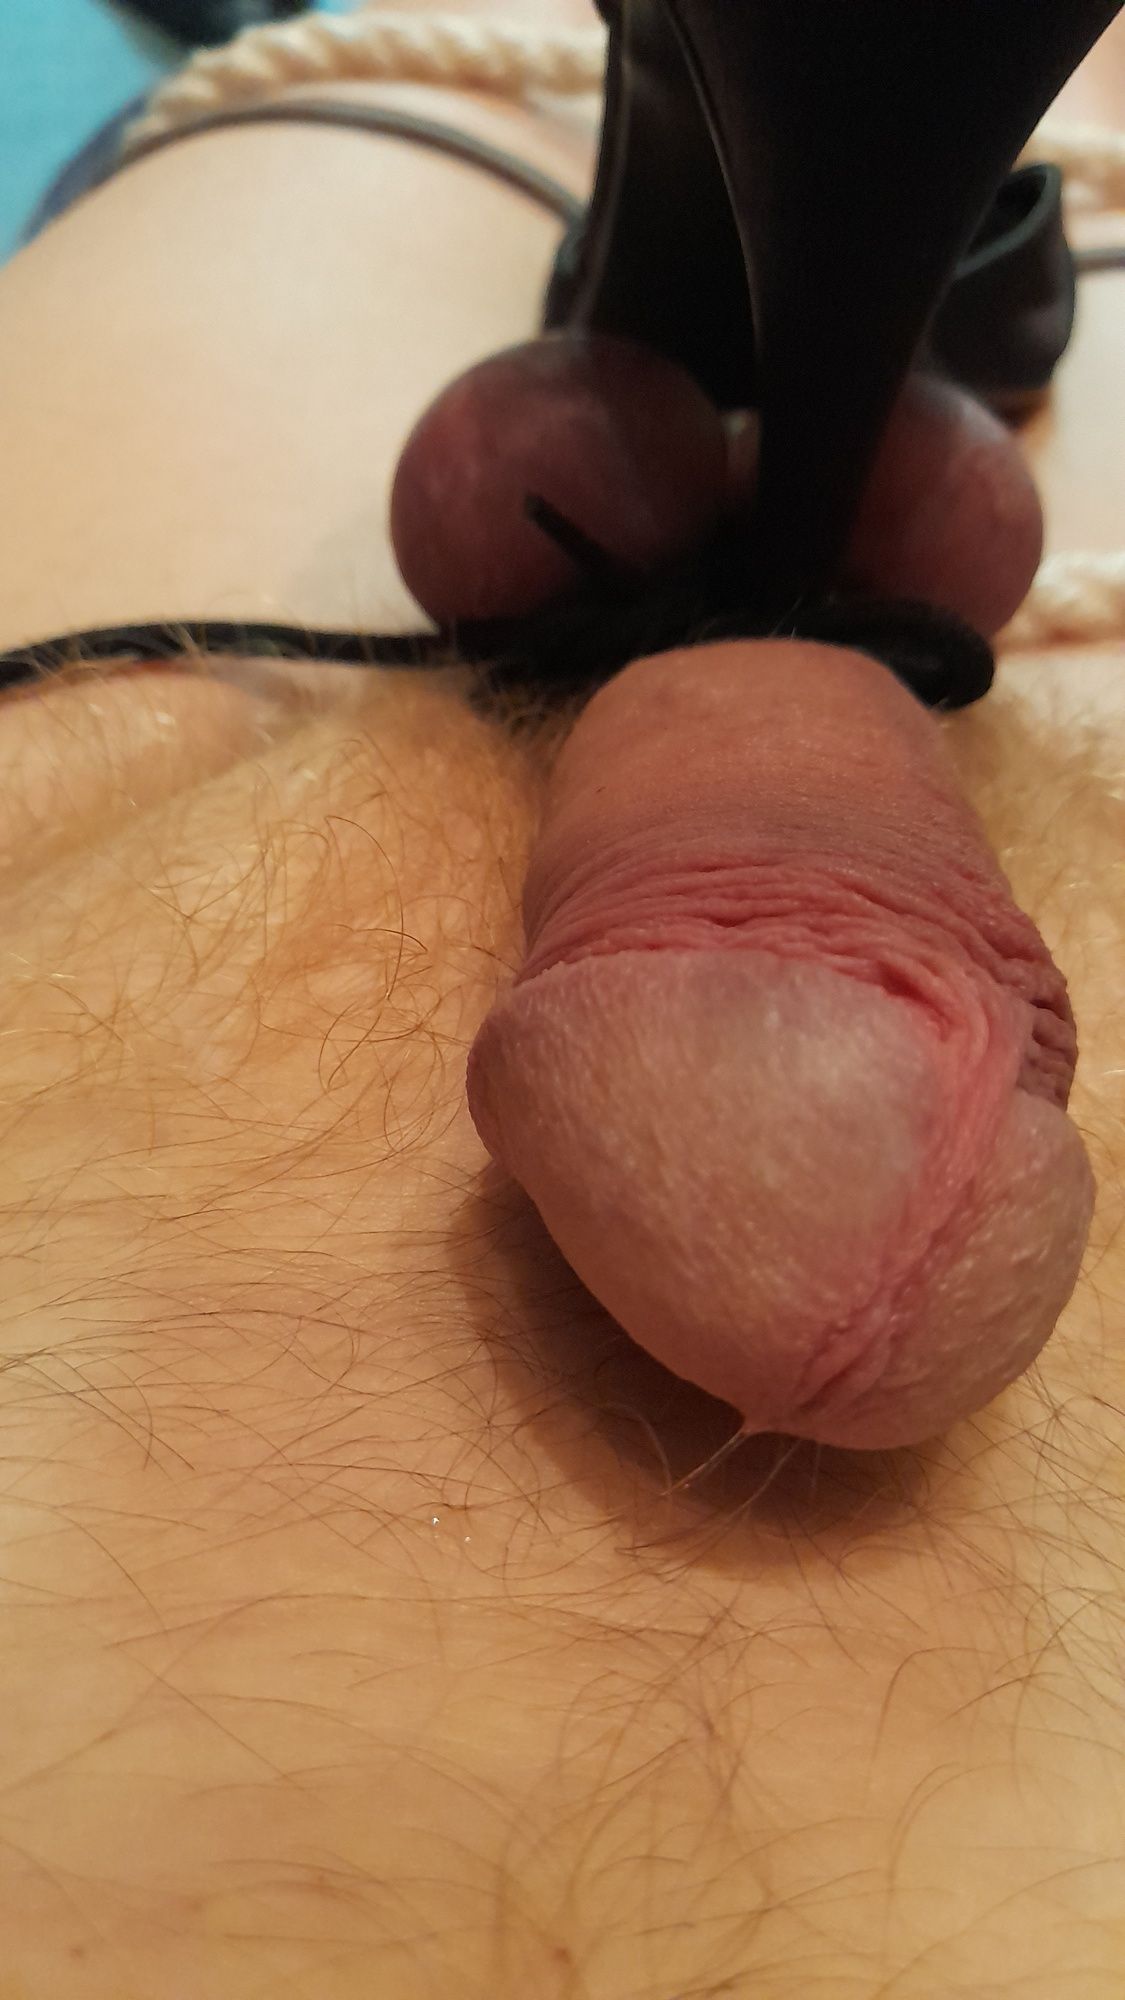 many pics of my cock #45